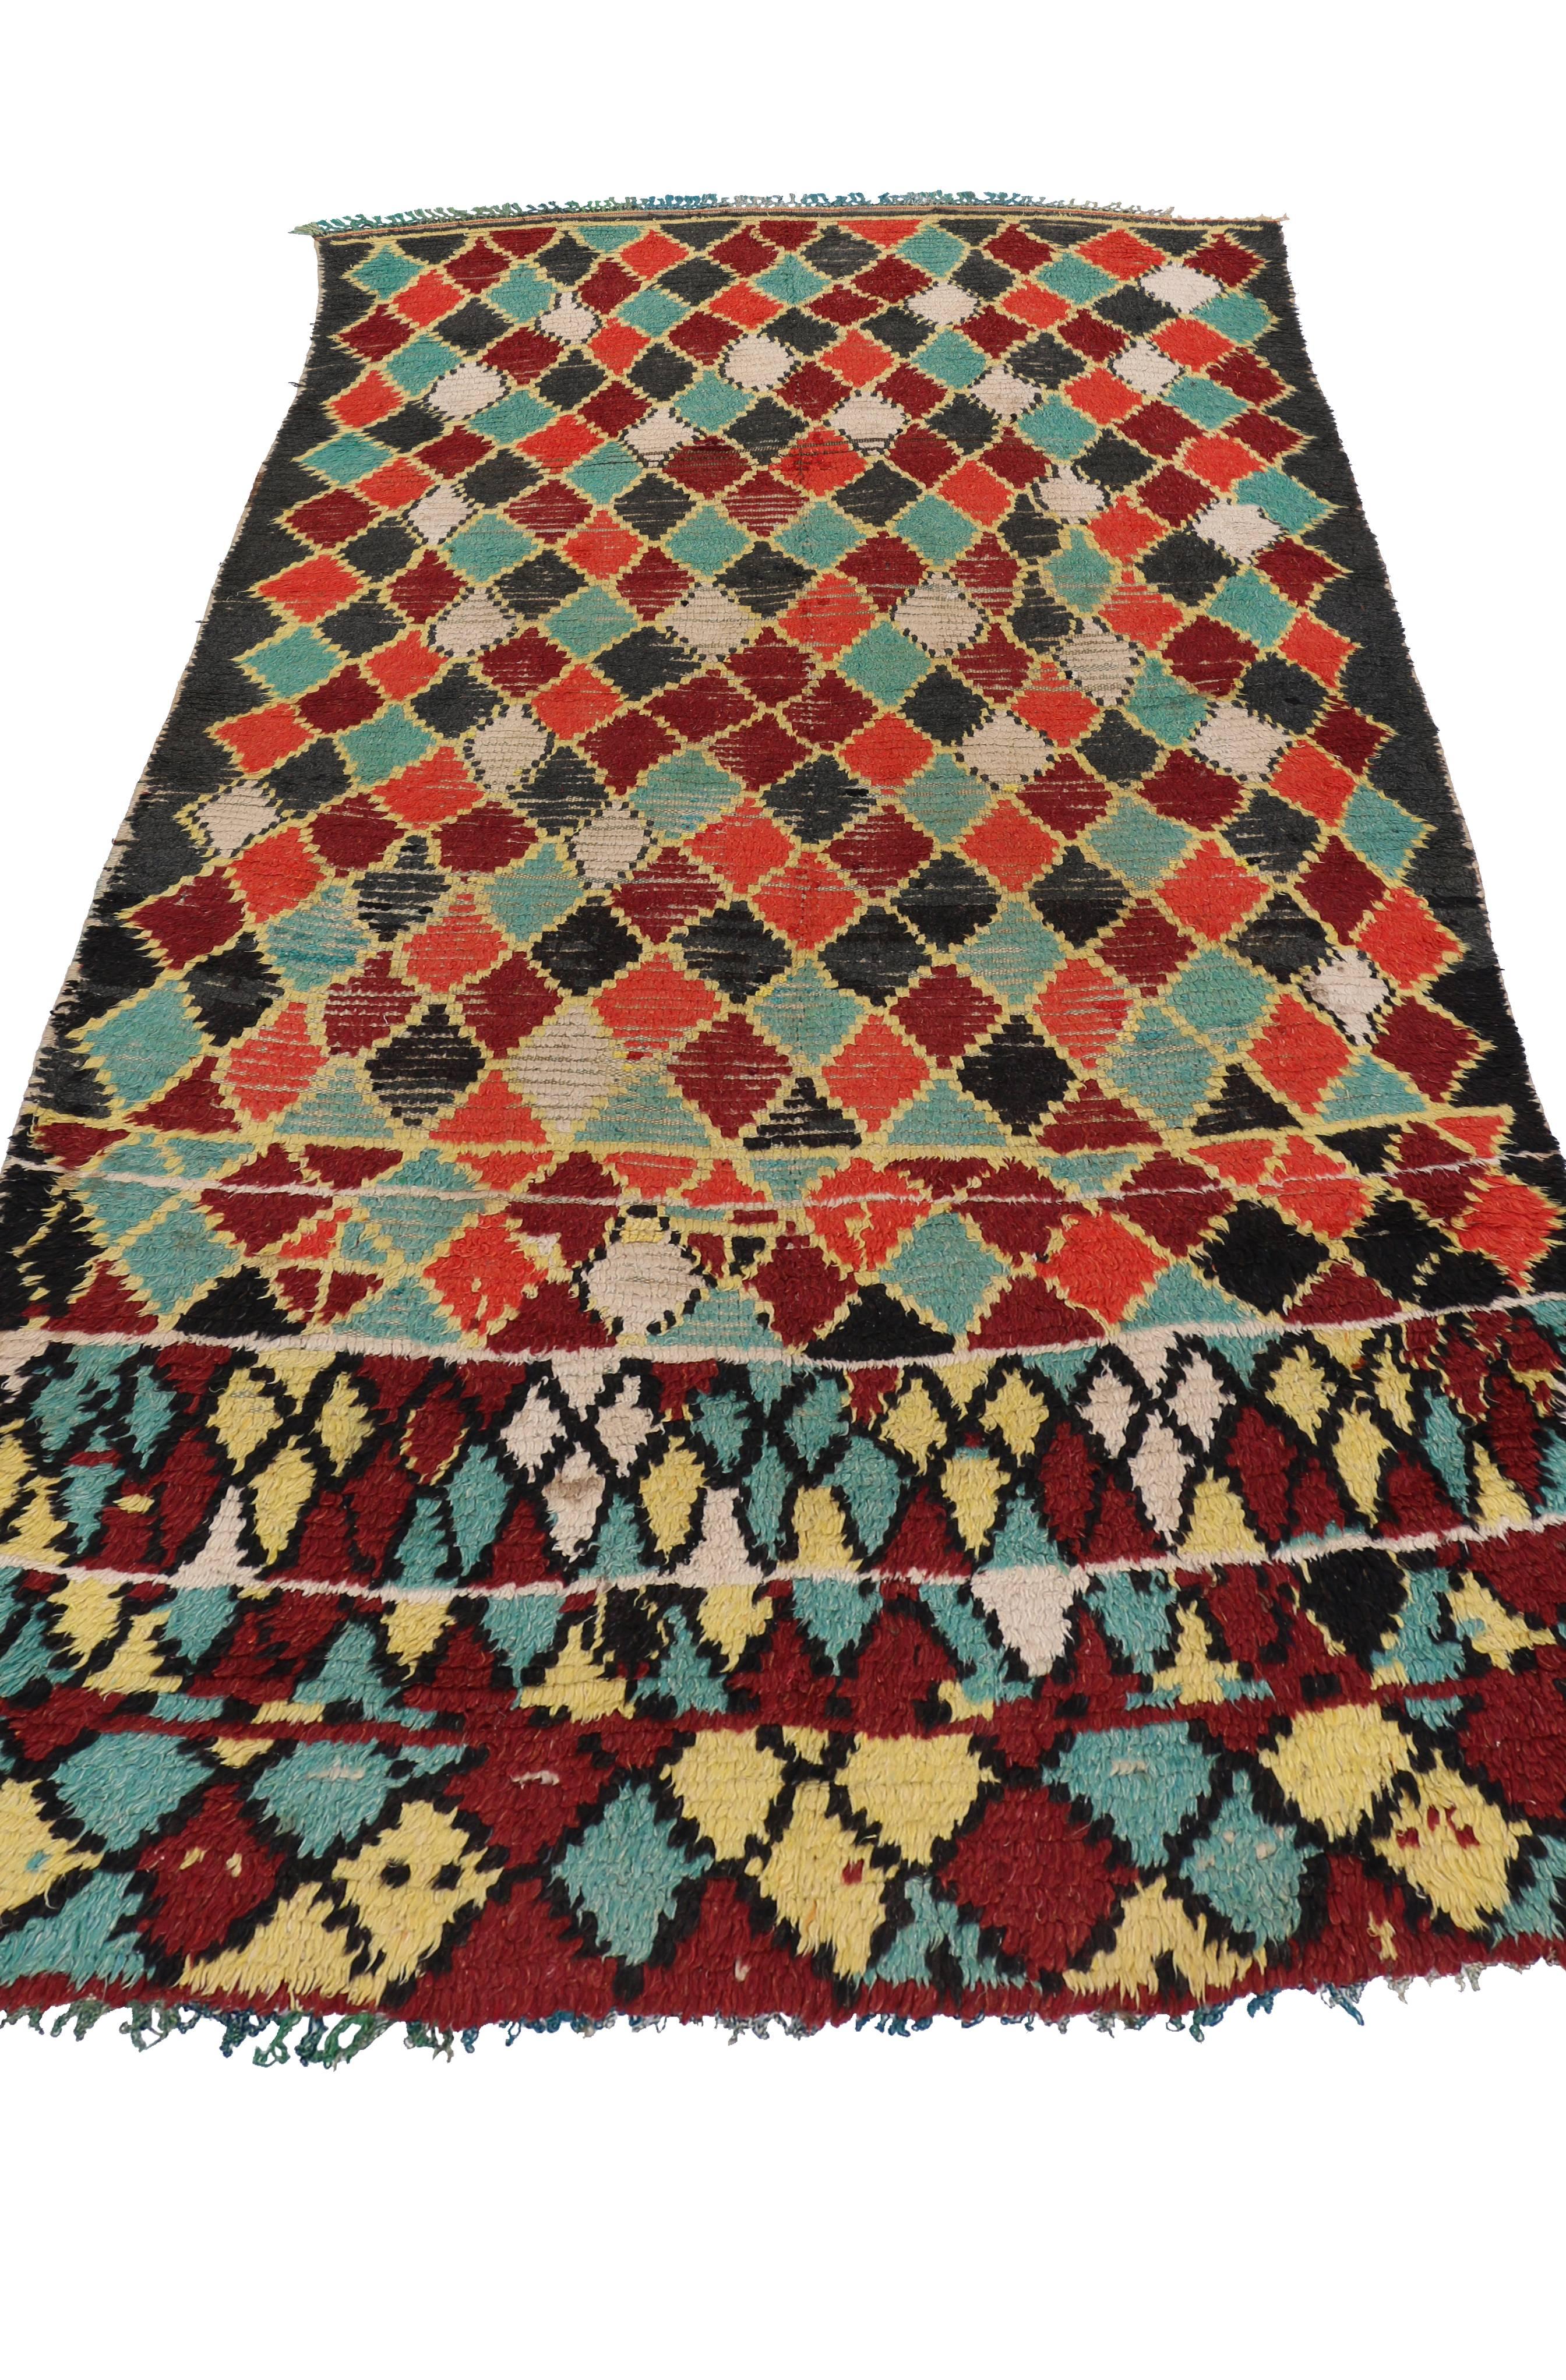 Vintage Berber Moroccan Rug with Modern Tribal Style 4